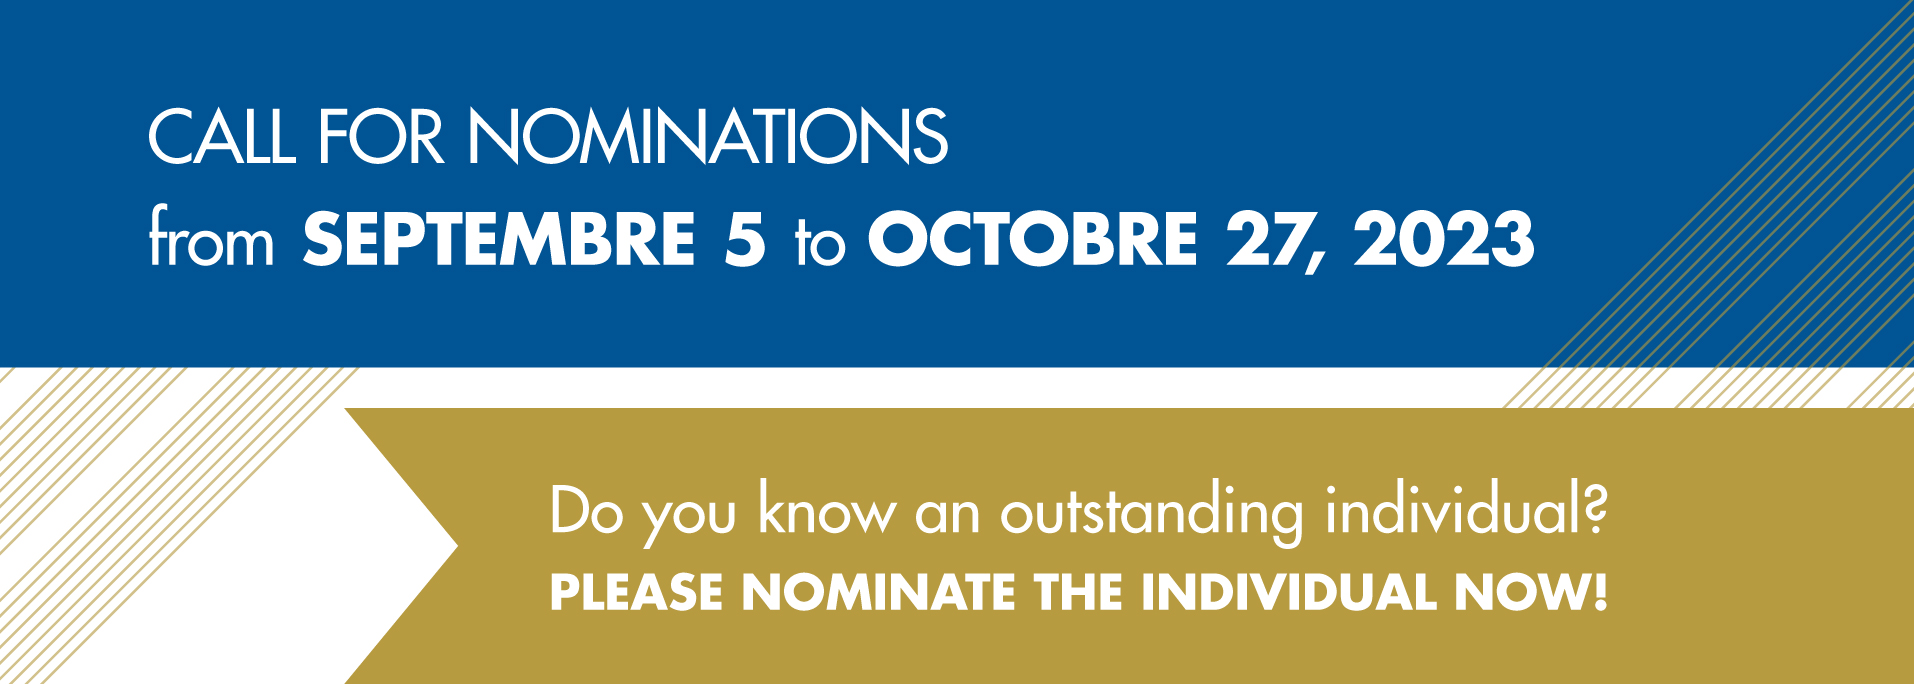 Call for nominations from September 5 to October 27, 2023.